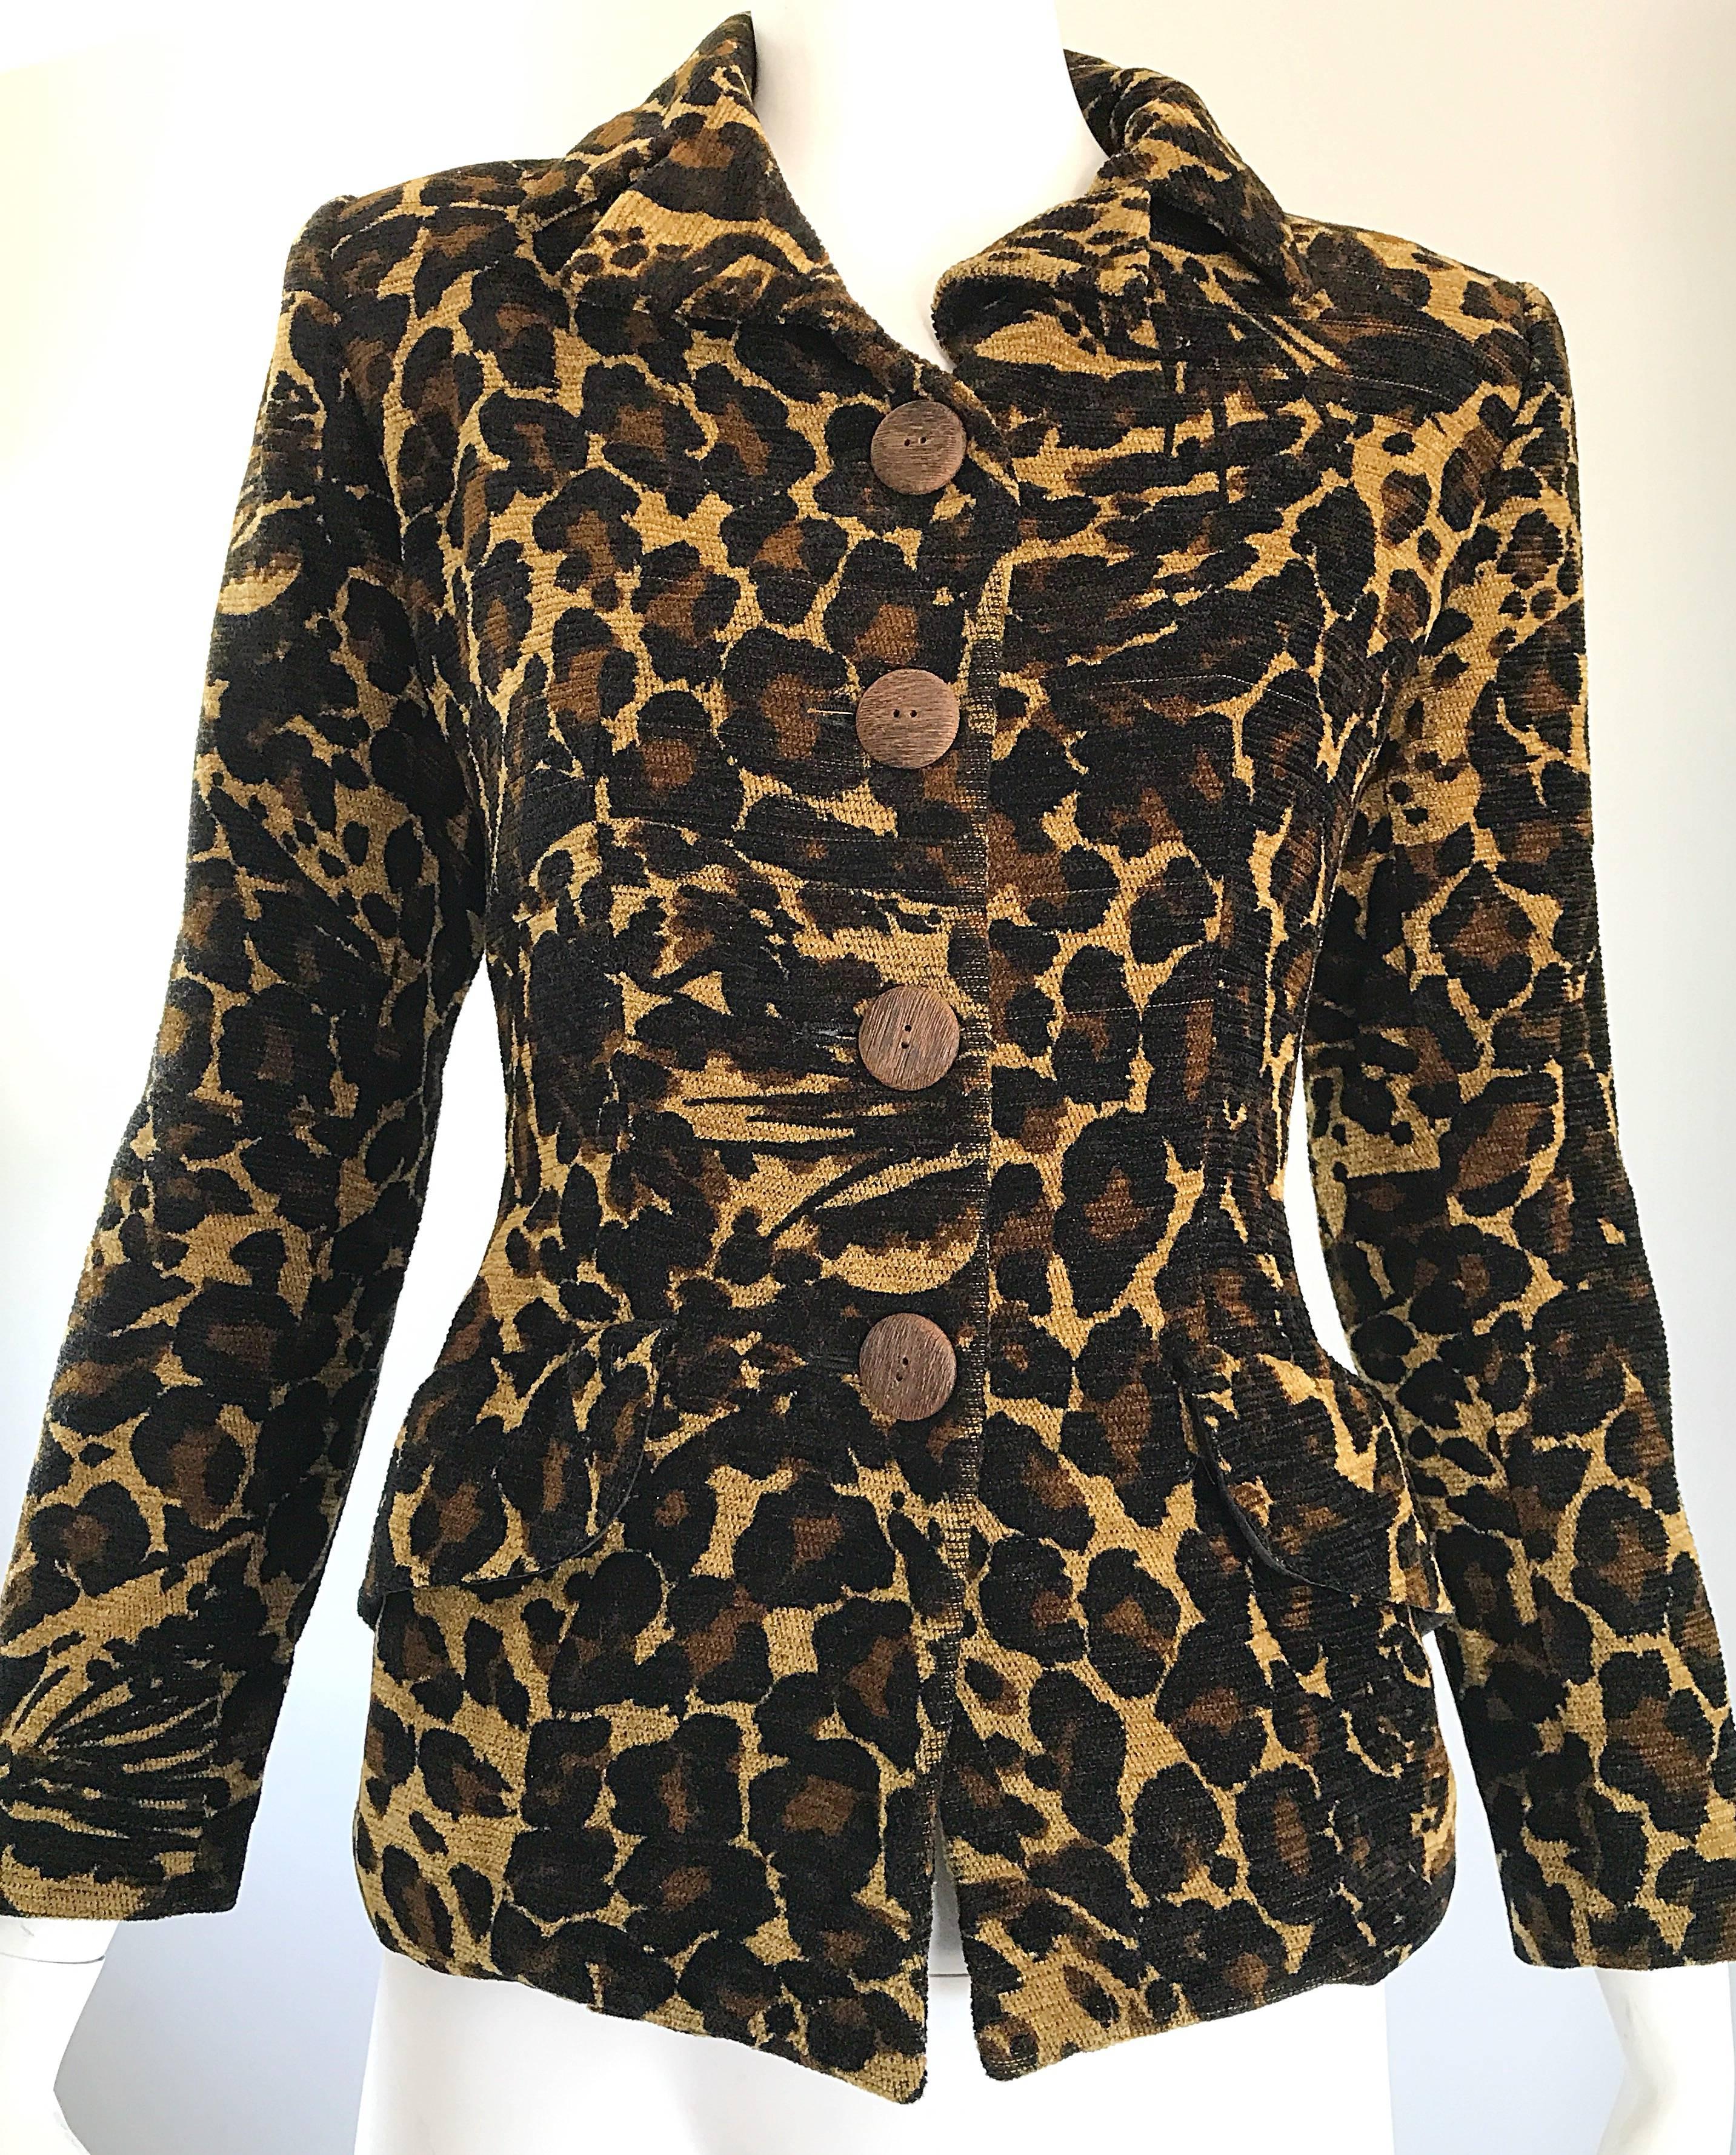 Iconic, and nothing short of spectacular early 1990s YVES SAINT LAURENT YSL ' Rive Gauche ' leopard cheetah print tailored jacket! Four large wood buttons up the front. Pockets at each side of the waist. Fully lined. Incredibly well made. Can easily